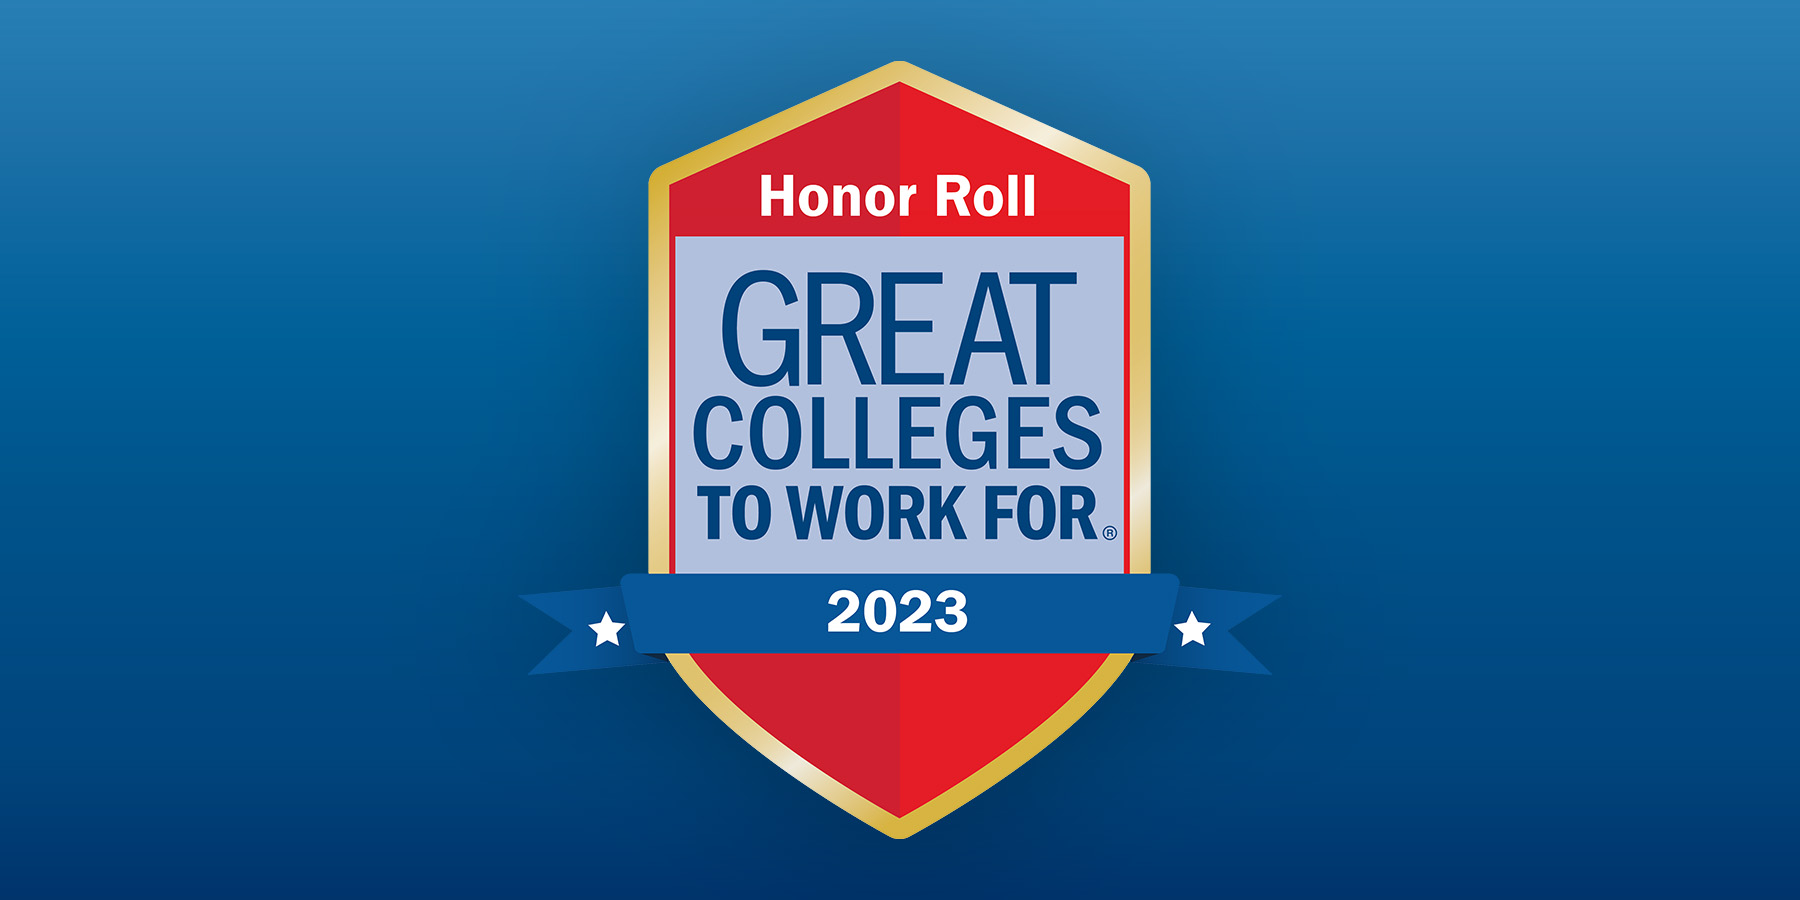 Great colleges 2023